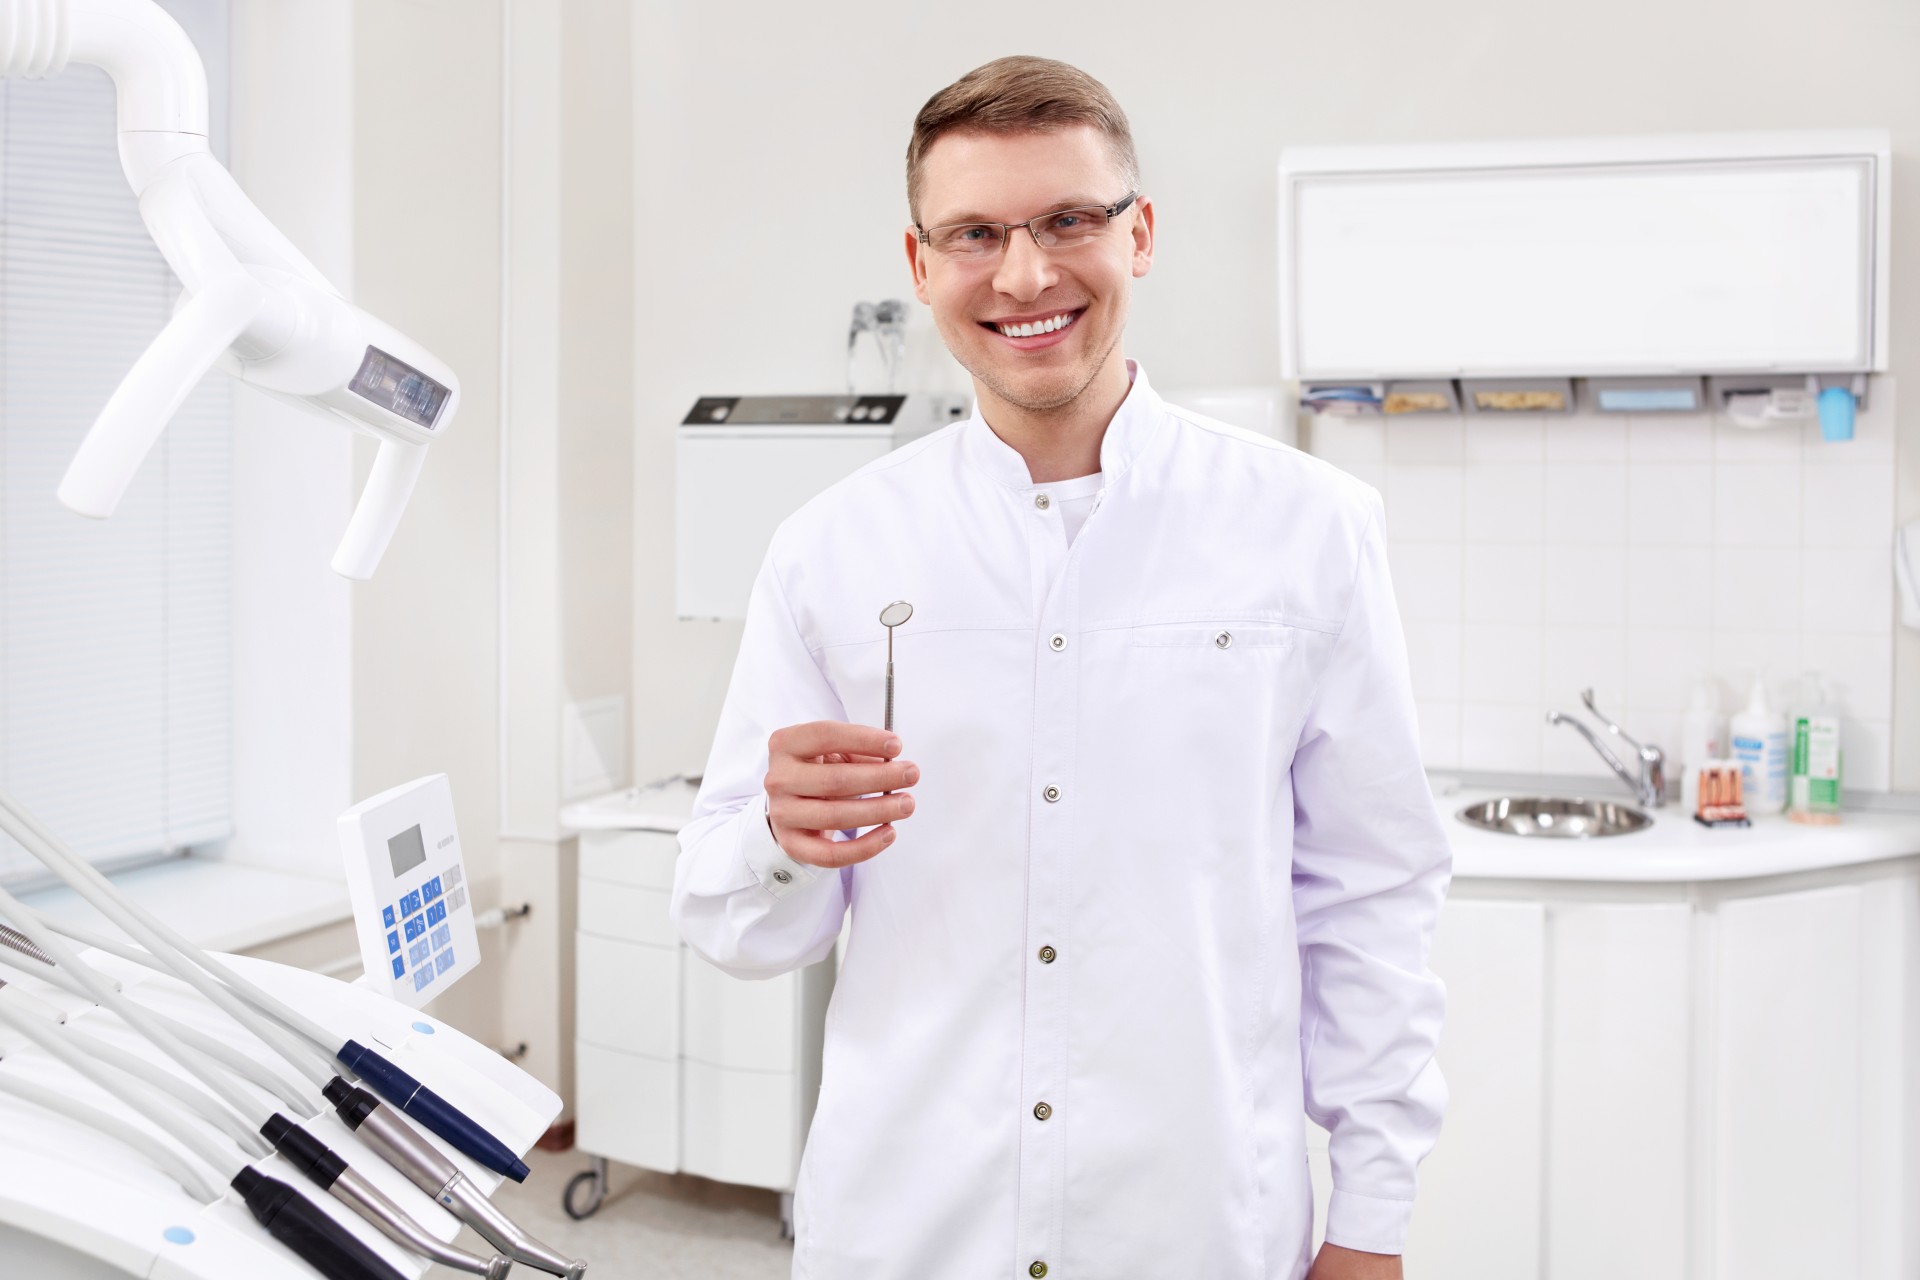 Cut Your Dental Visits In Half With CEREC®